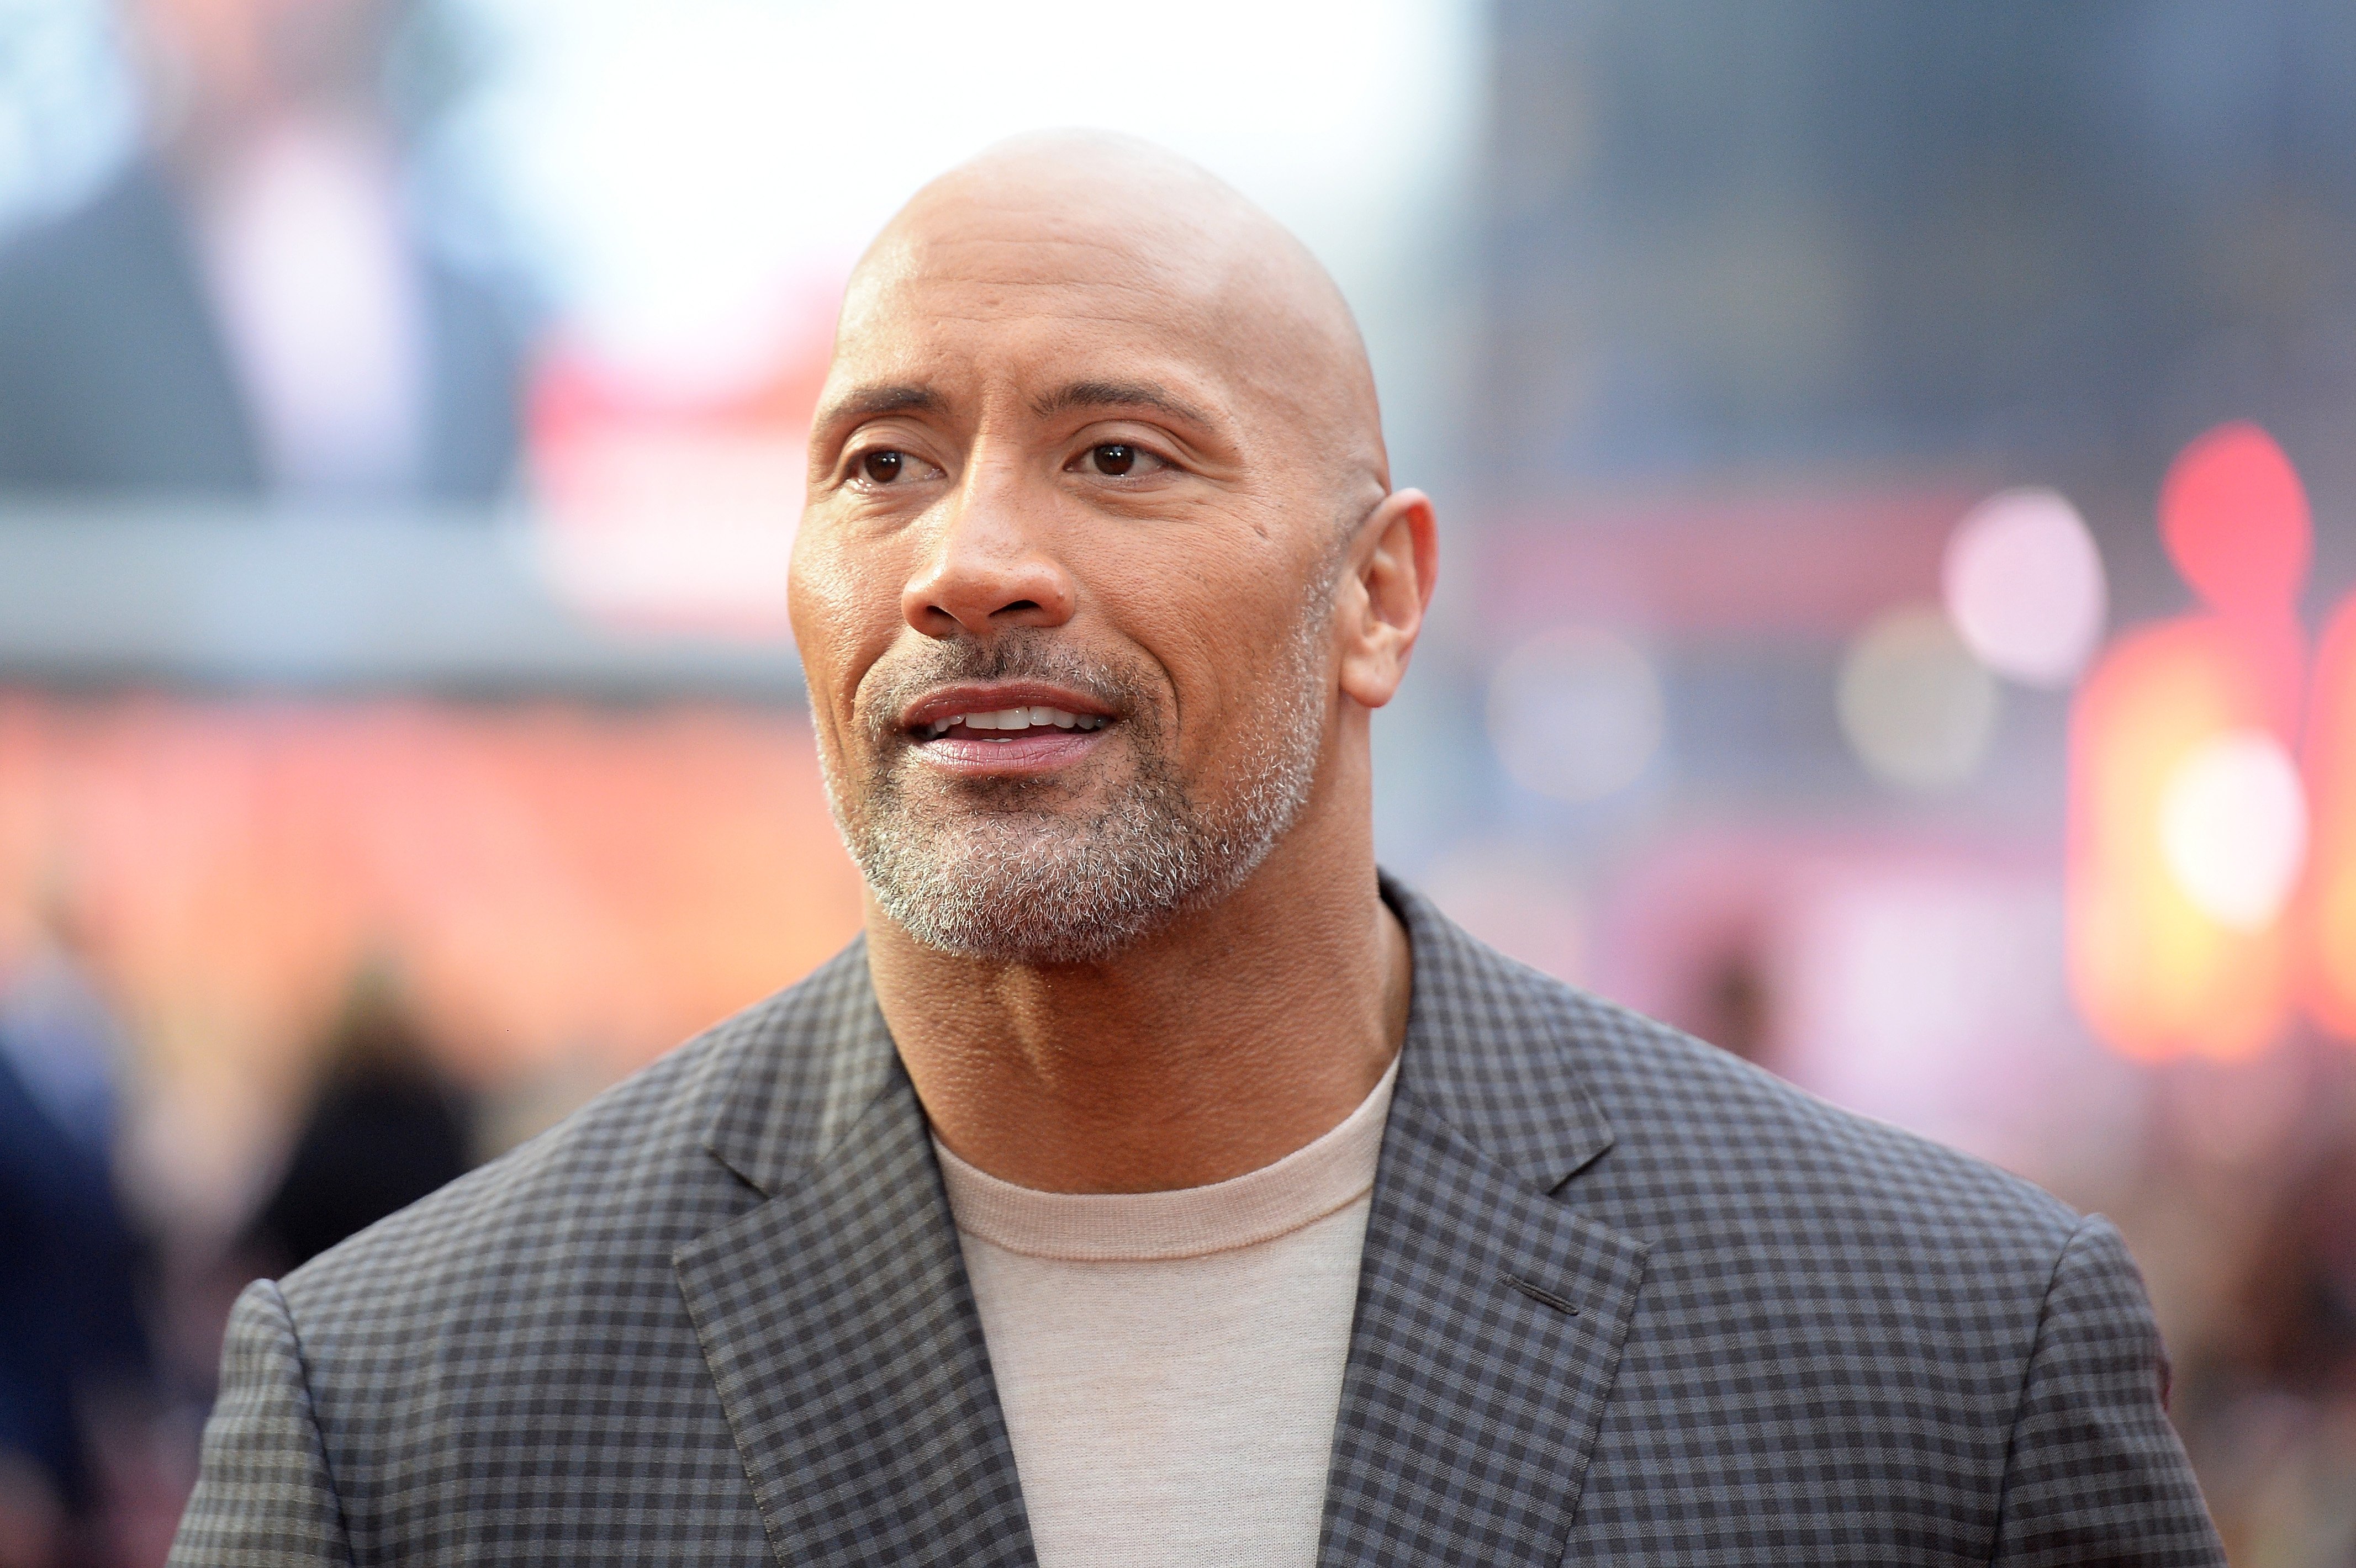 Dwayne Johnson at the European Premiere of 'Rampage' on April 11, 2018 in London, England | Photo: Getty Images